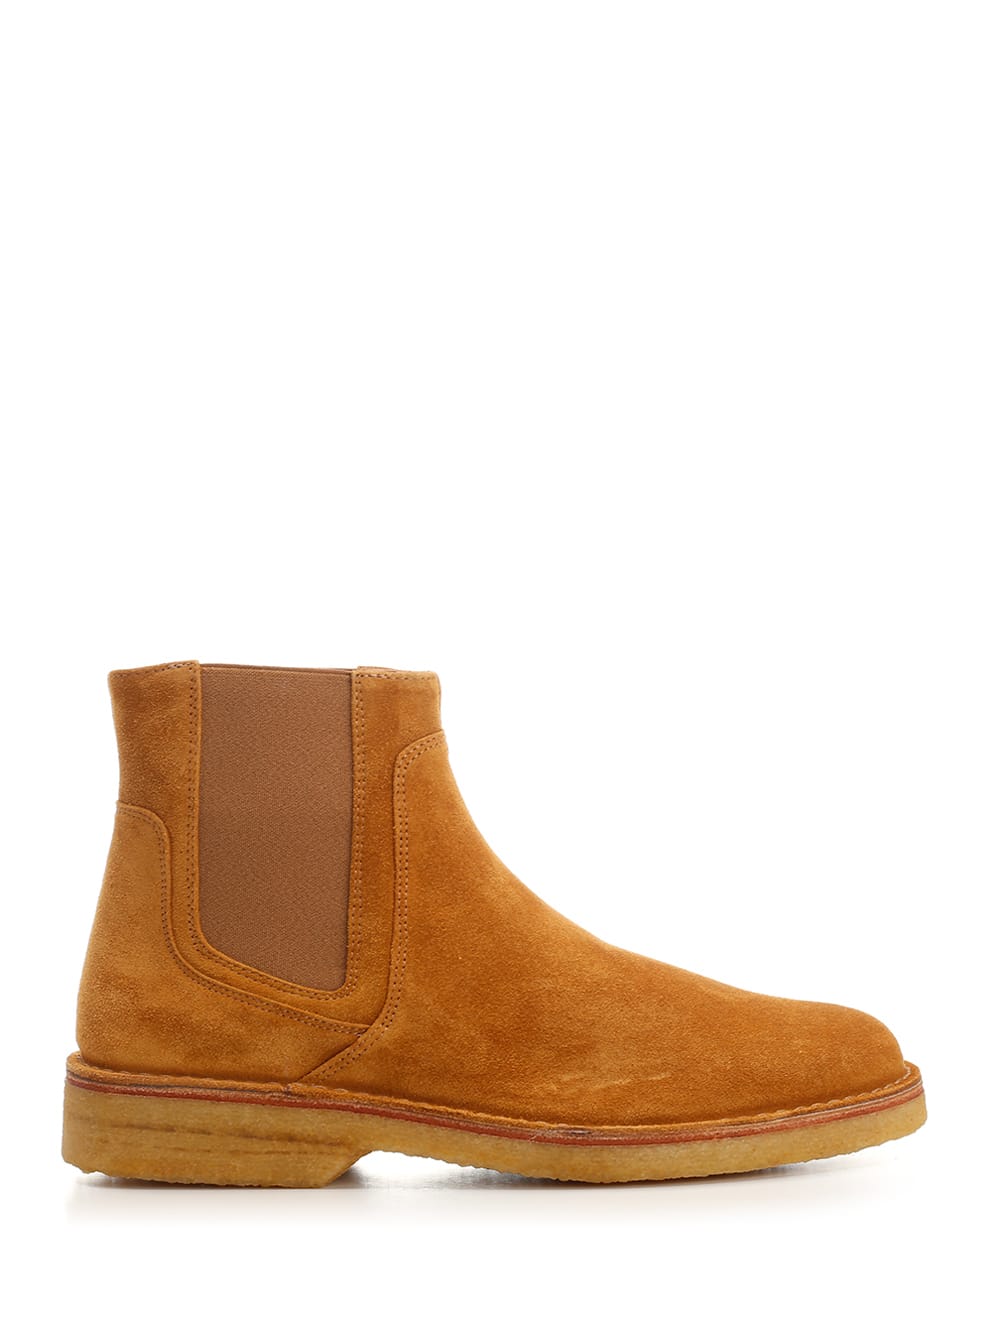 APC THEODORE ANKLE BOOT